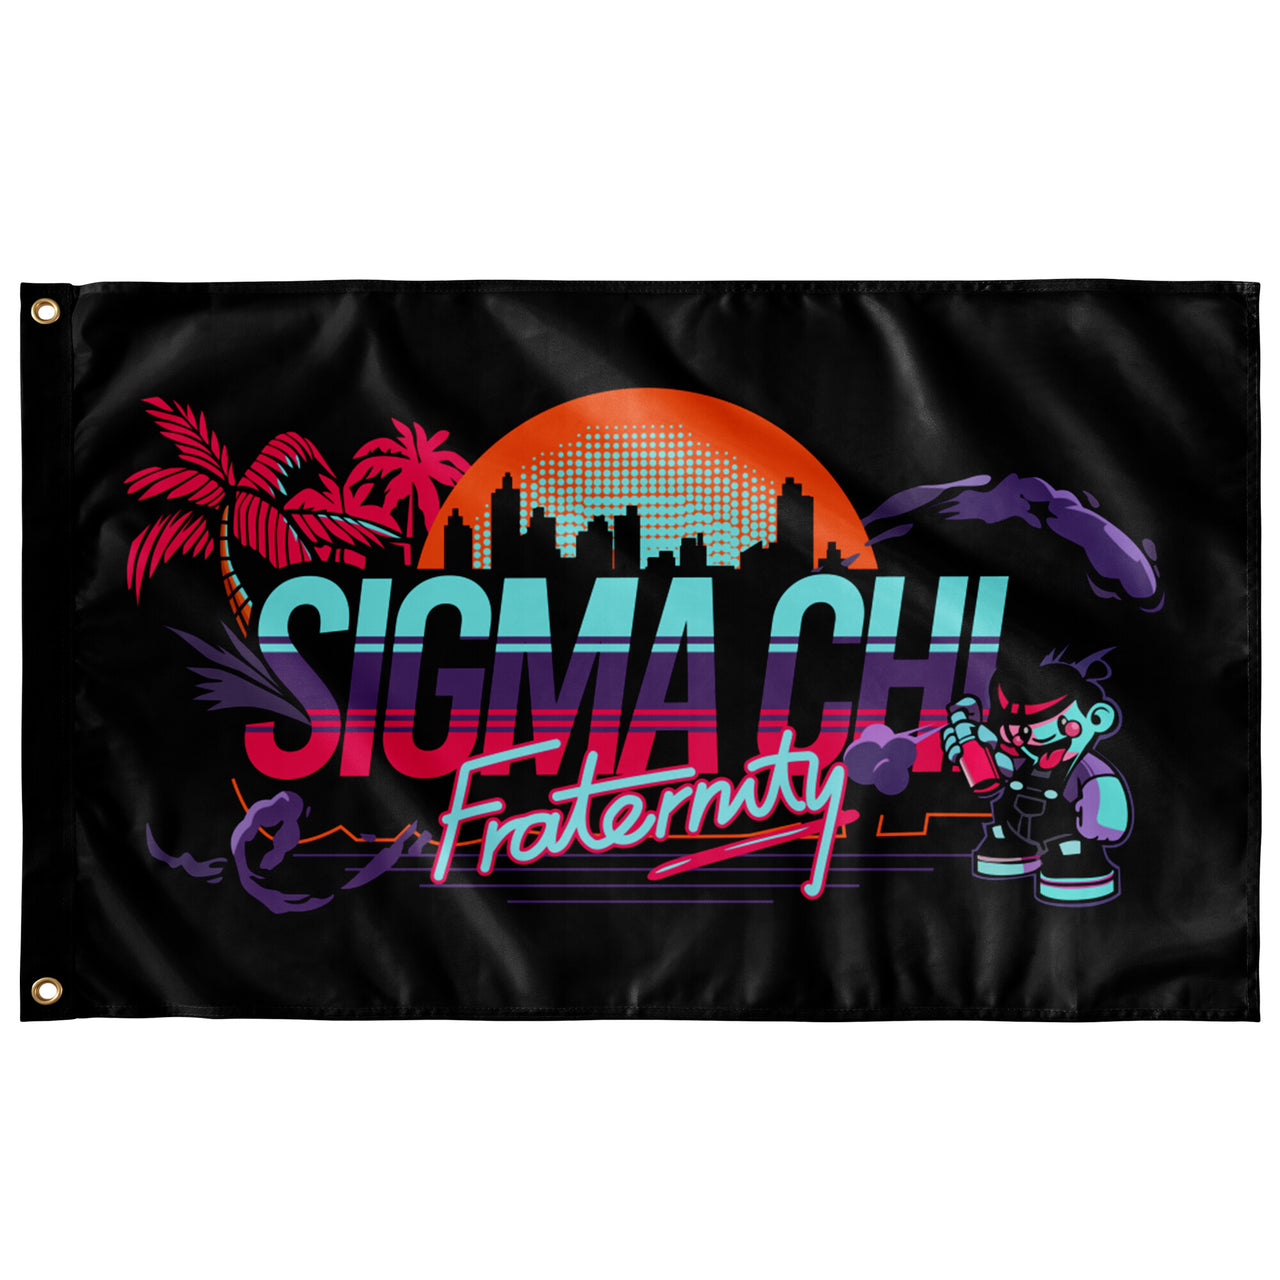 Sigma Chi Flag | Jump Street | 3' x 5' Sigma Chi Flag for Dorms, Fraternity Houses, and On Campus Events